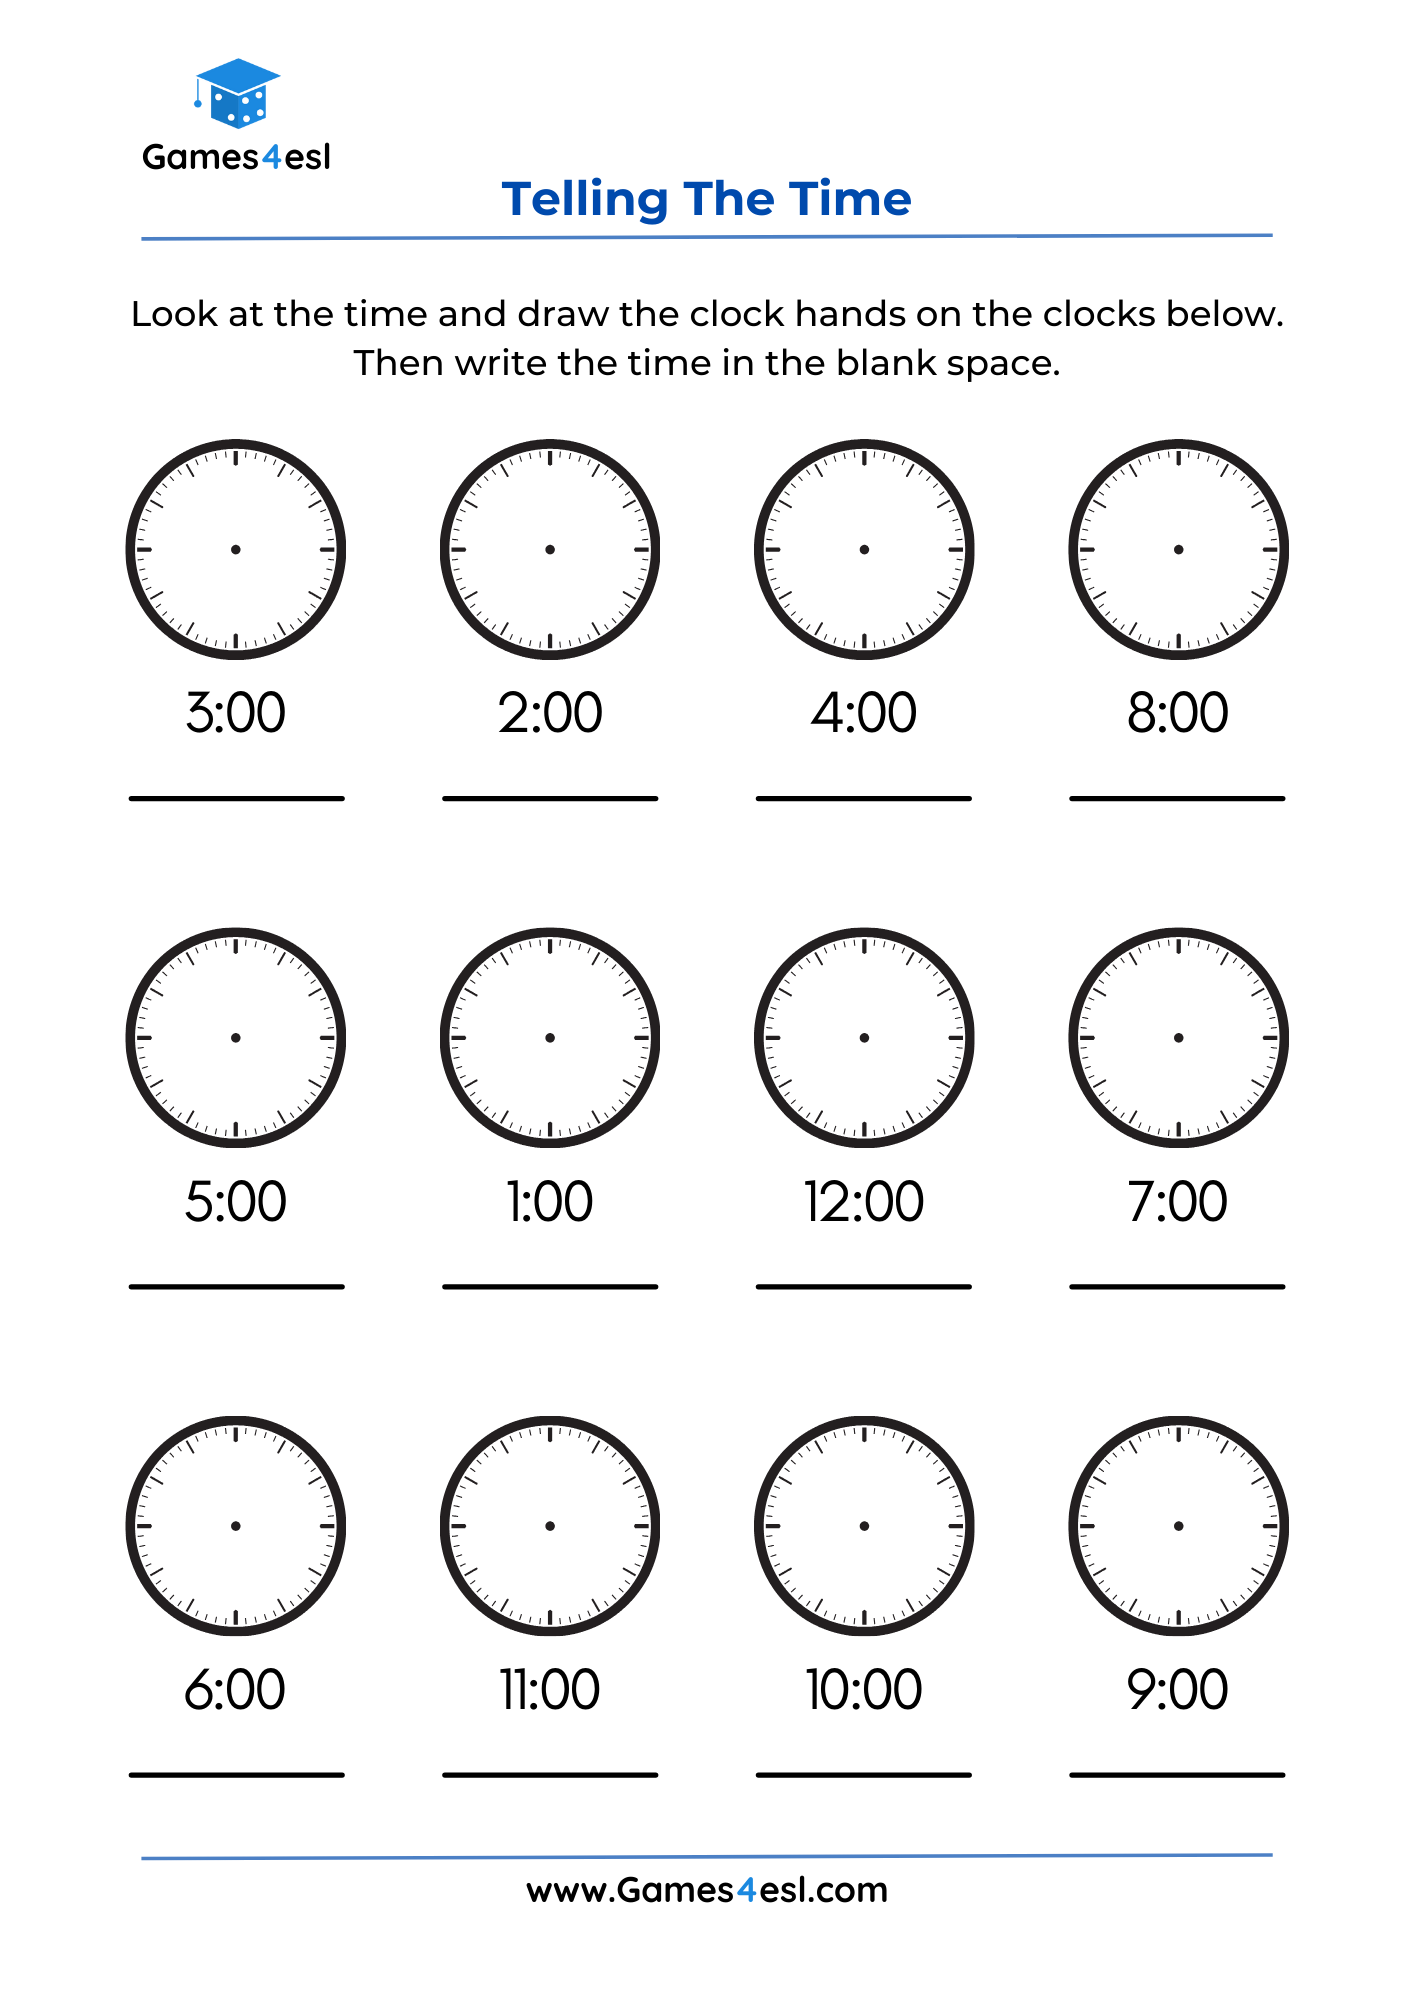 A Grade 2 Worksheet to practice telling the time.